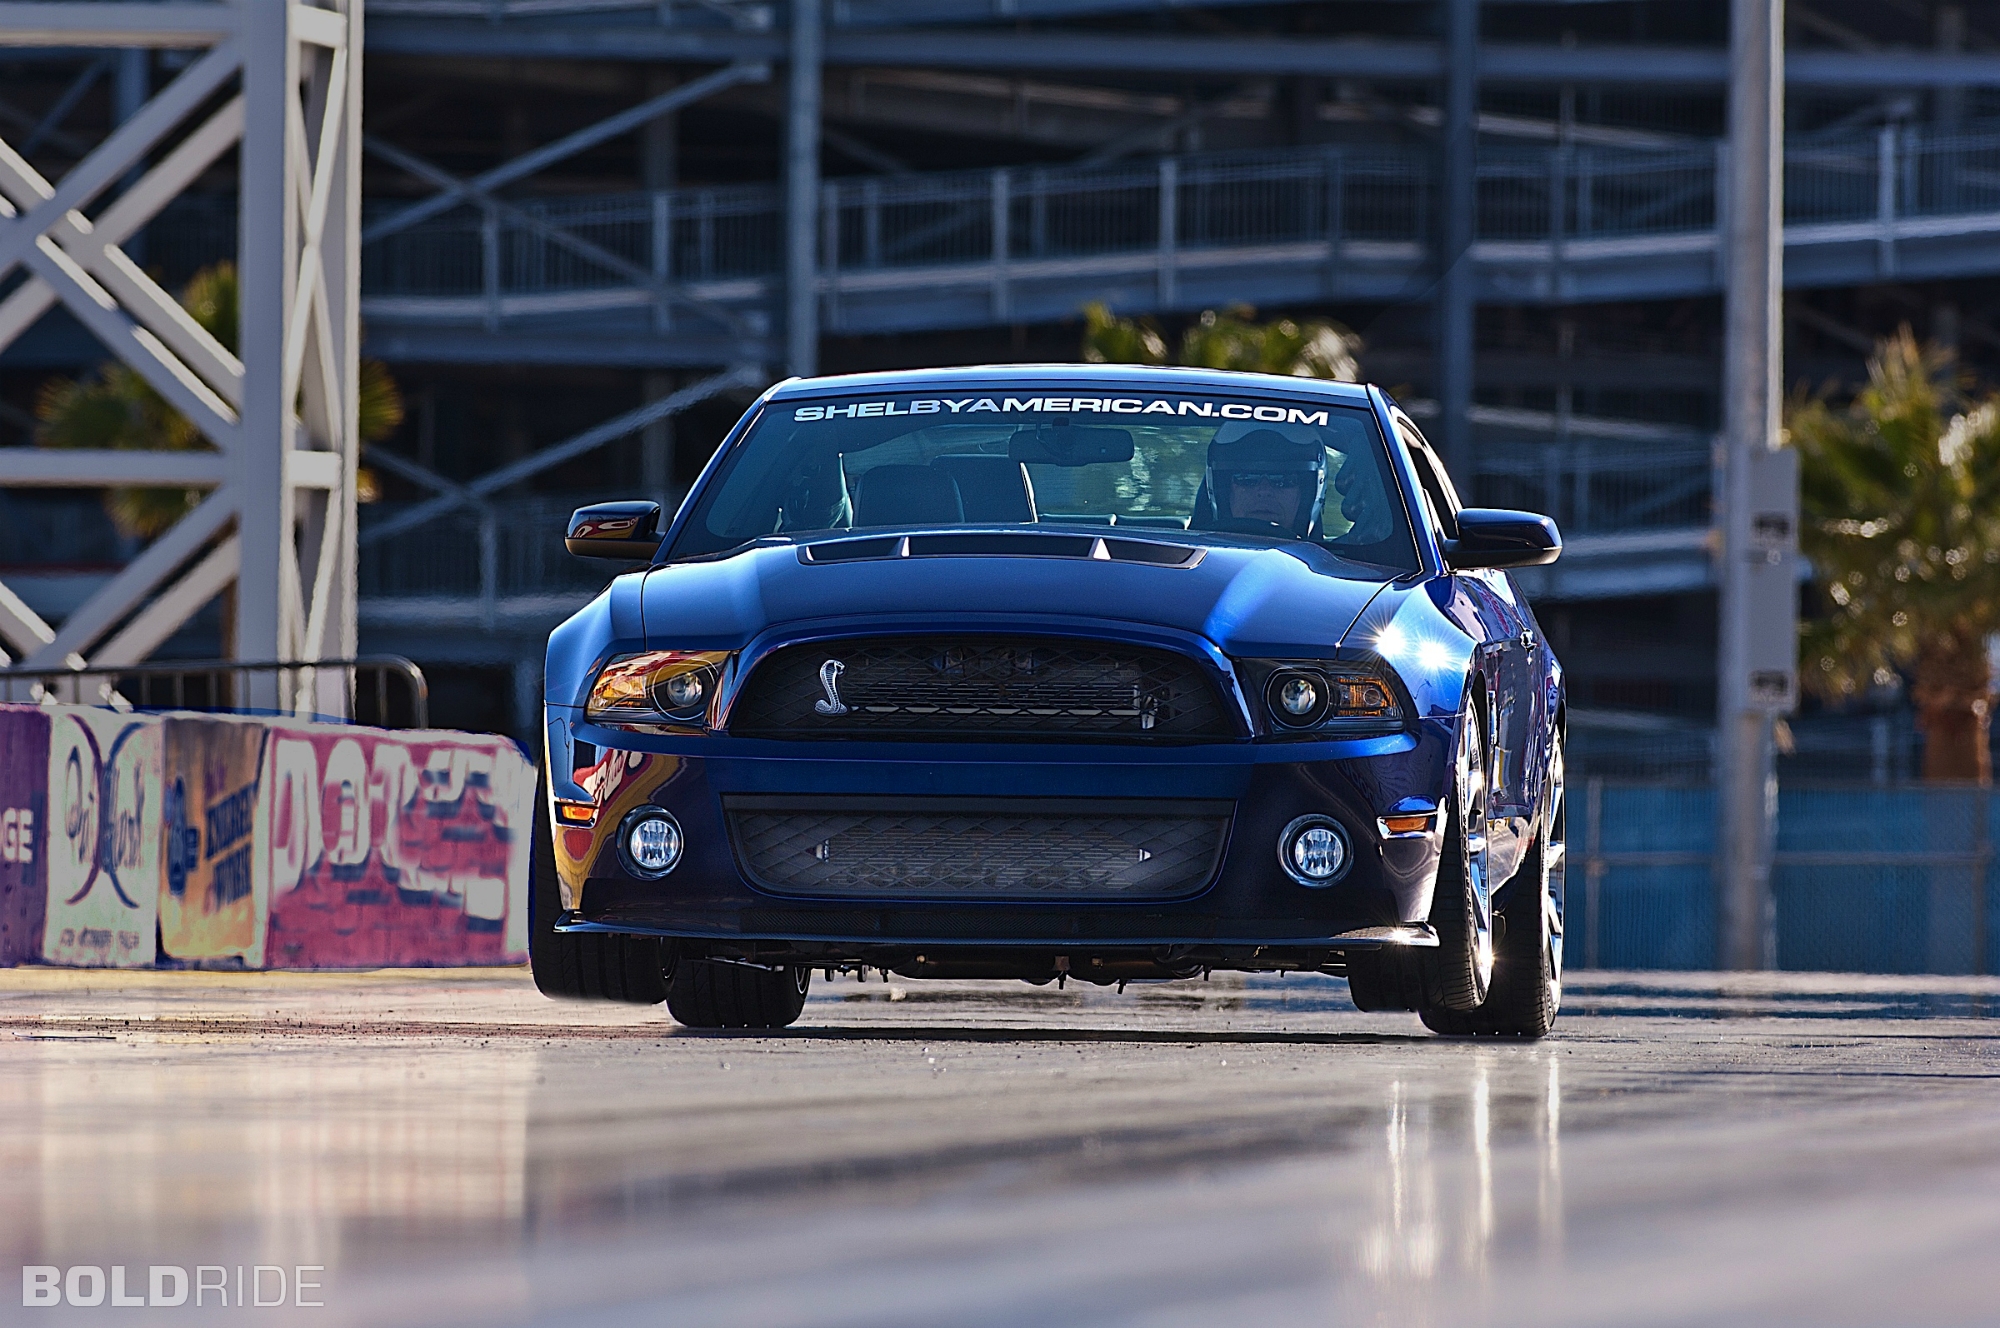 2012, Ford, Mustang, Shelby, 1000, Drag, Racing, Race, Car, Hot, Rod, Muscle, Cars Wallpaper